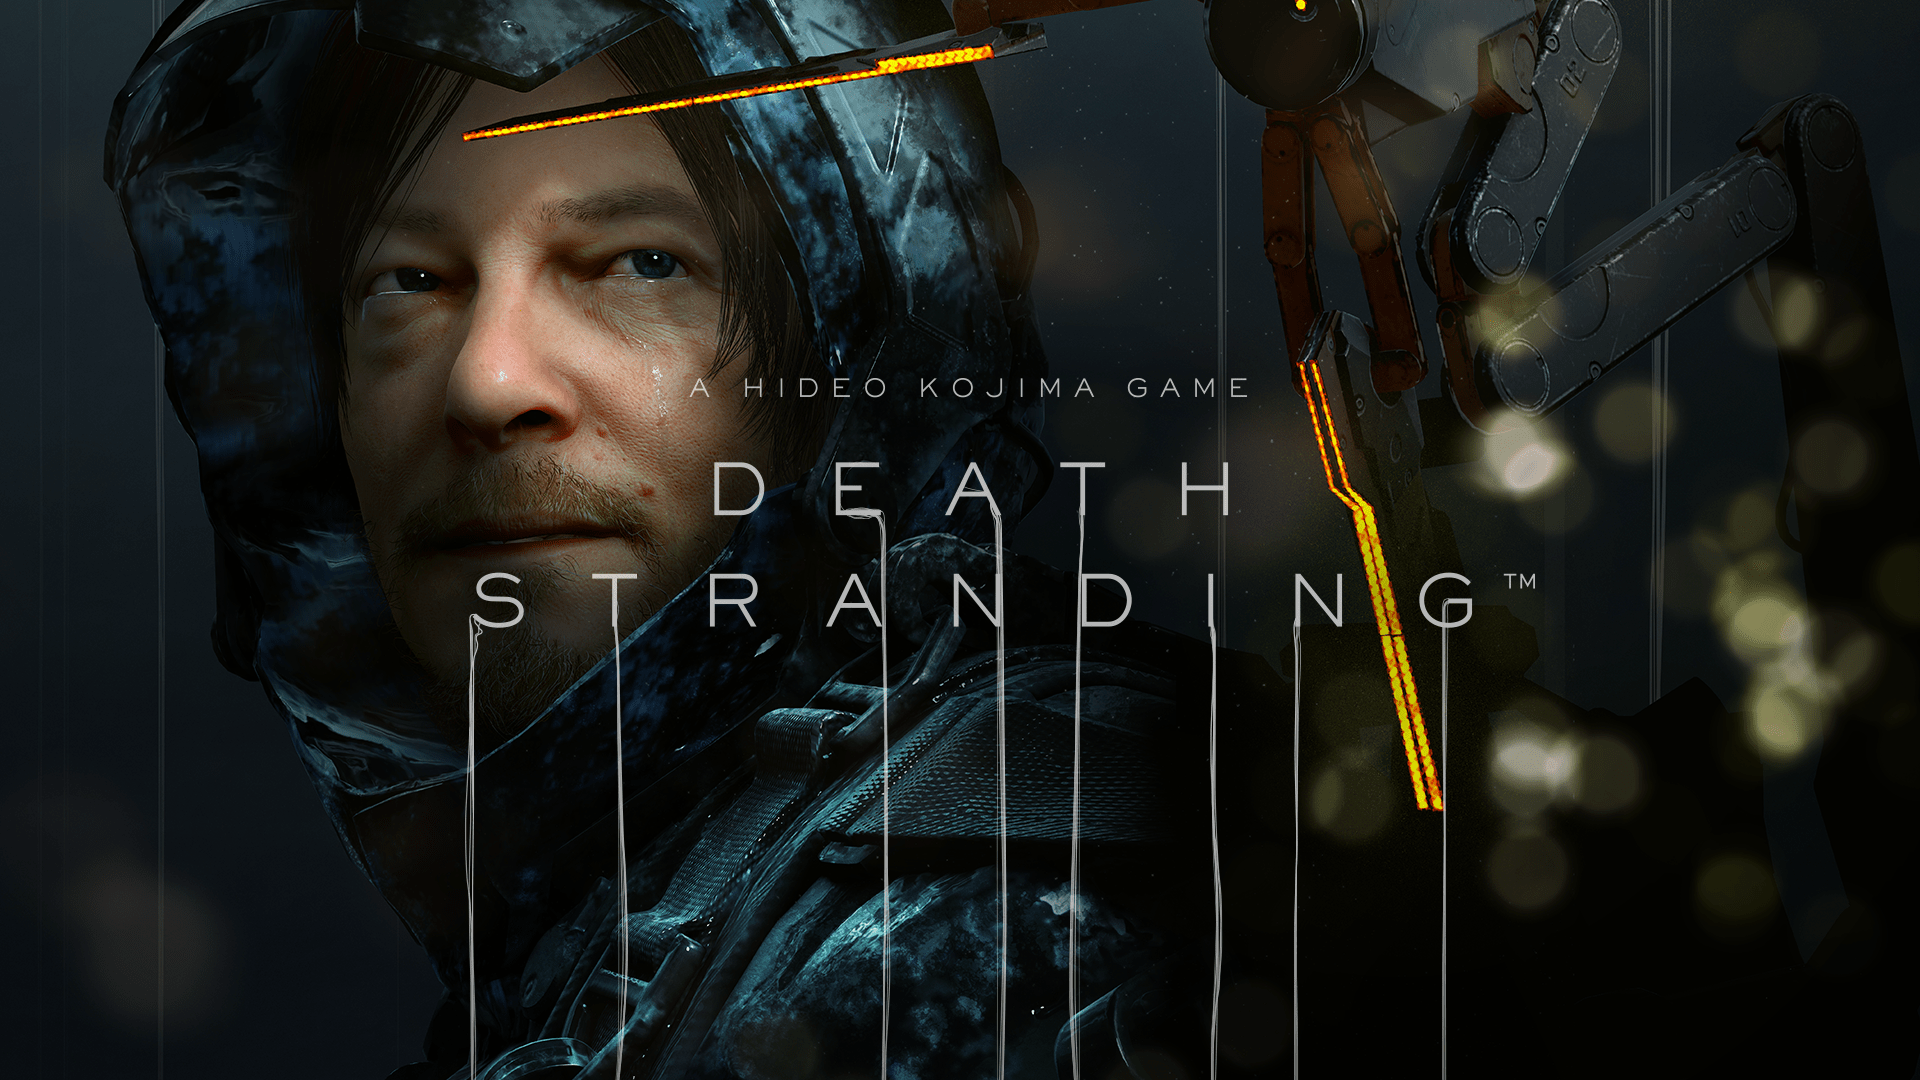 DEATH STRANDING IS COMING TO PC GAME PASS